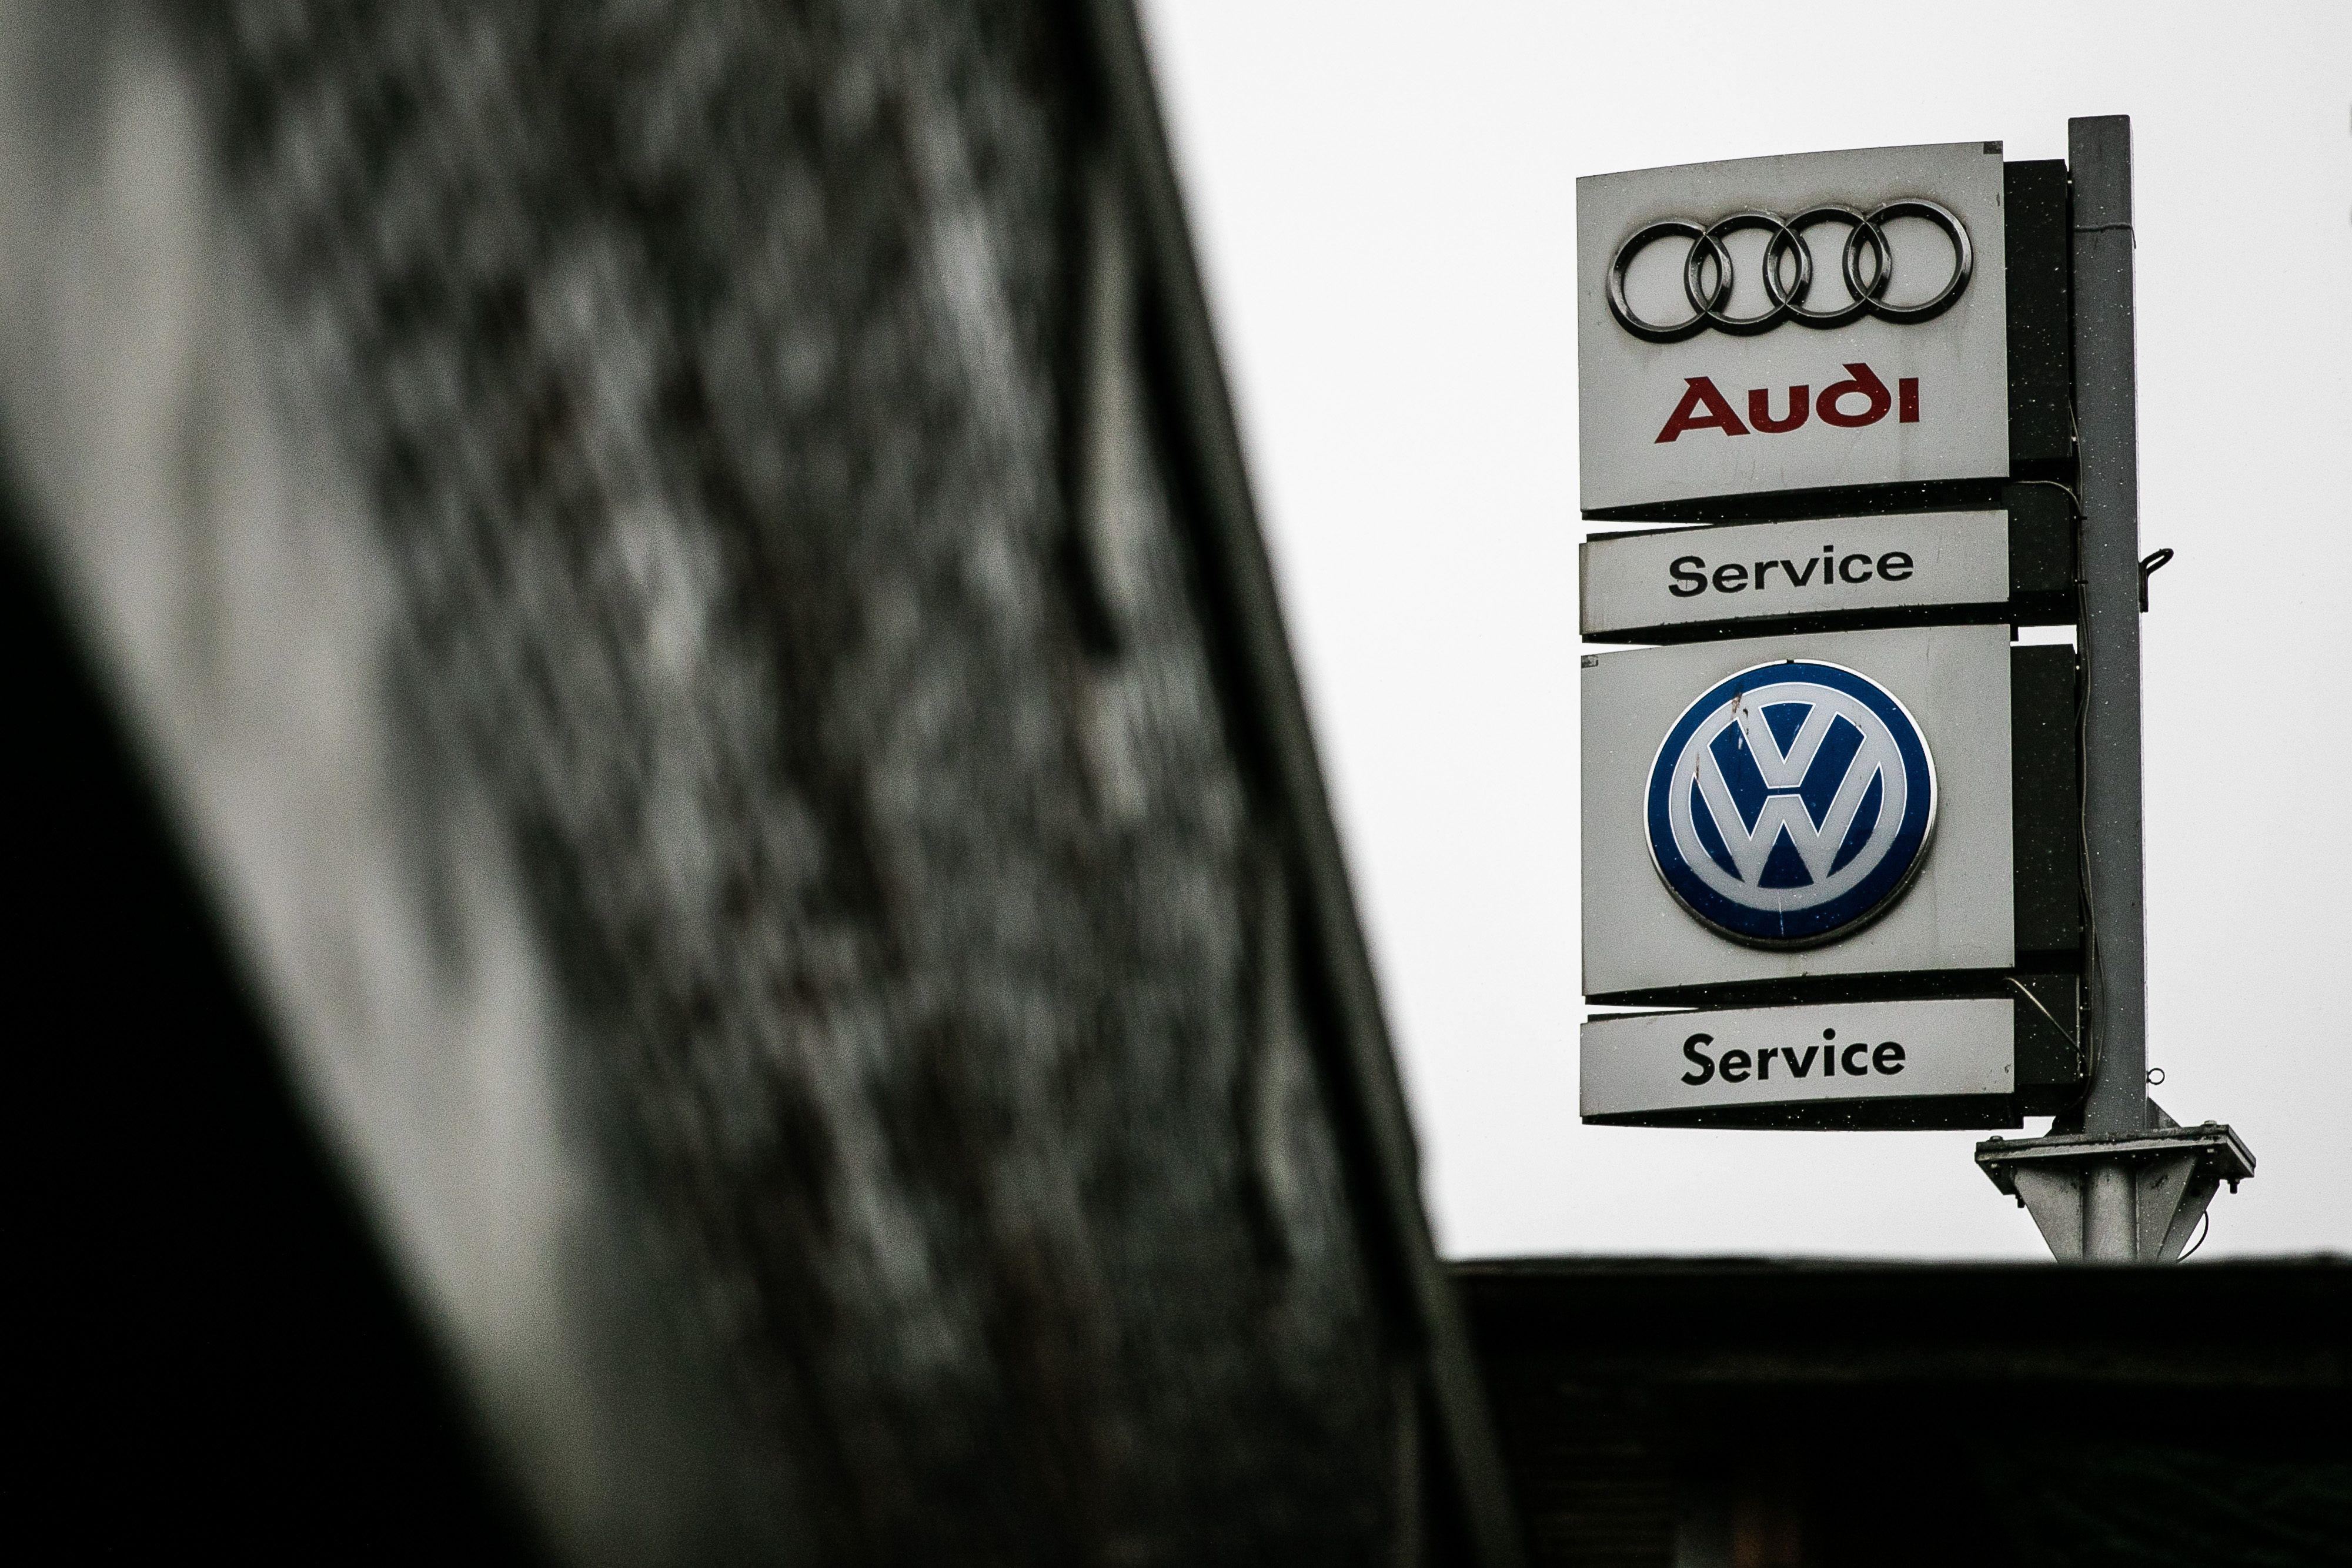 A sign showing Audi and VW dealerships